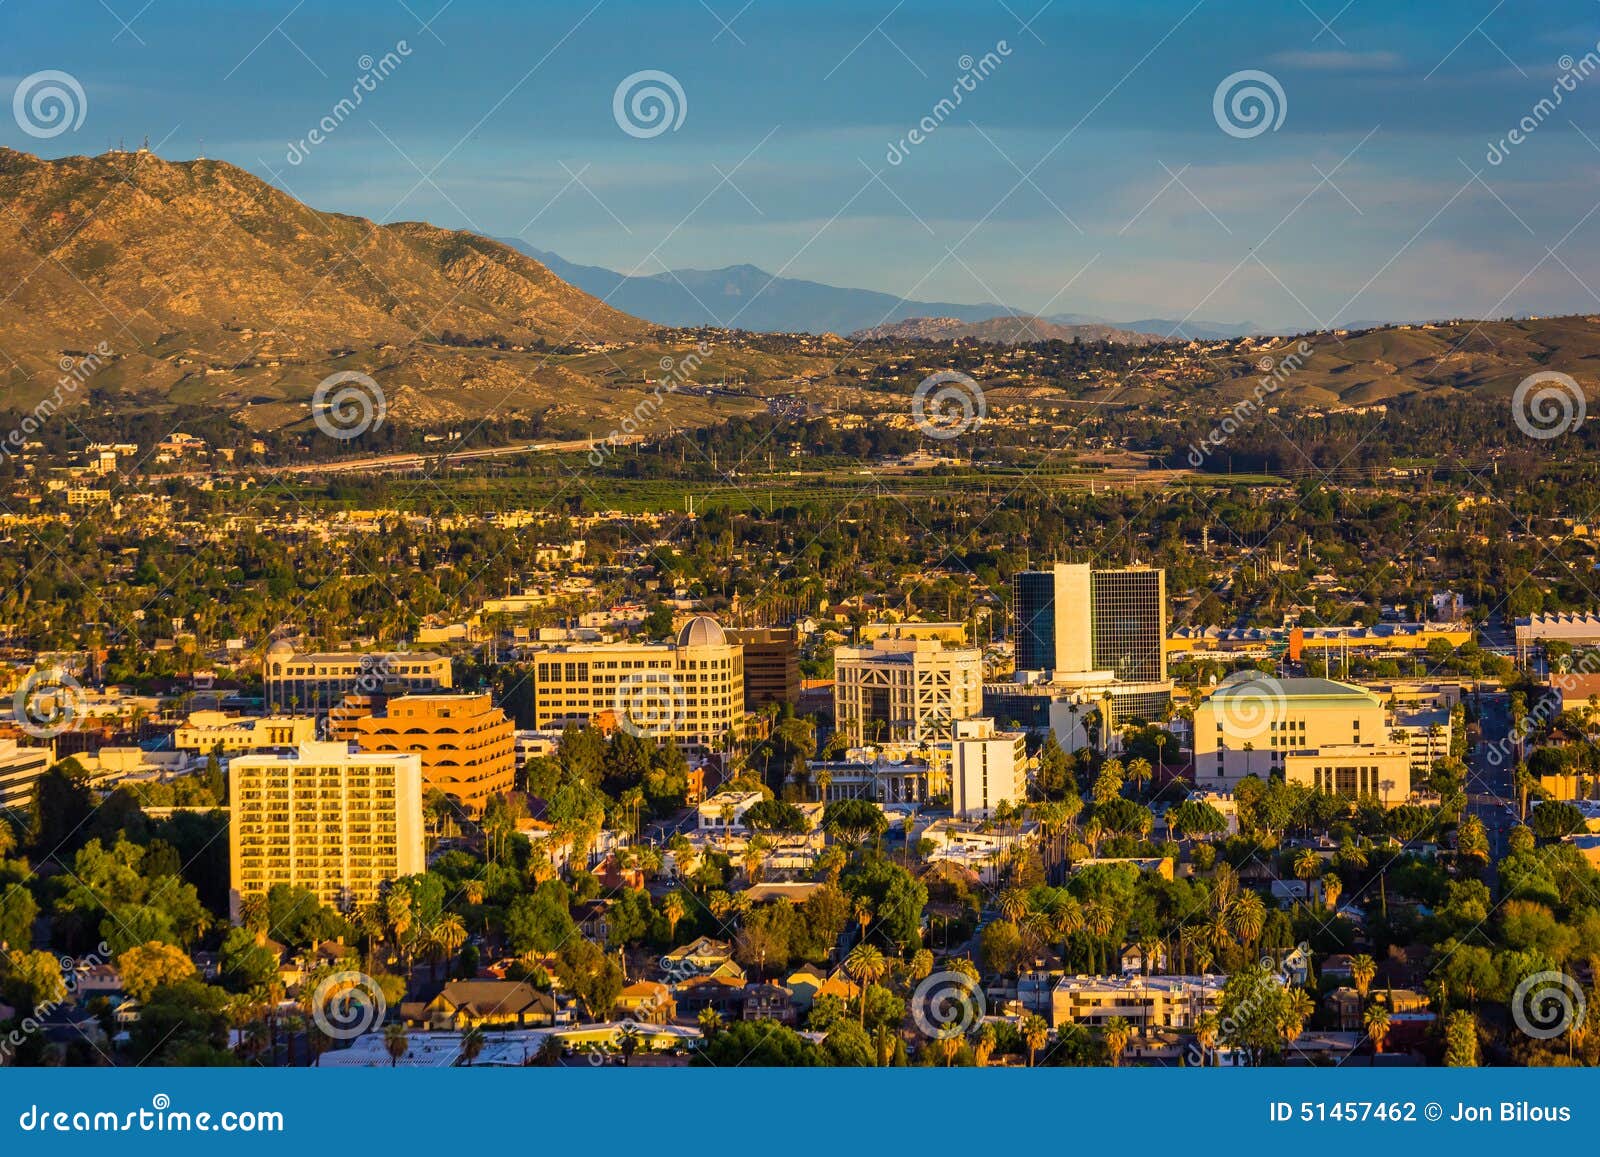 evening light on on distant mountains and the city of riverside